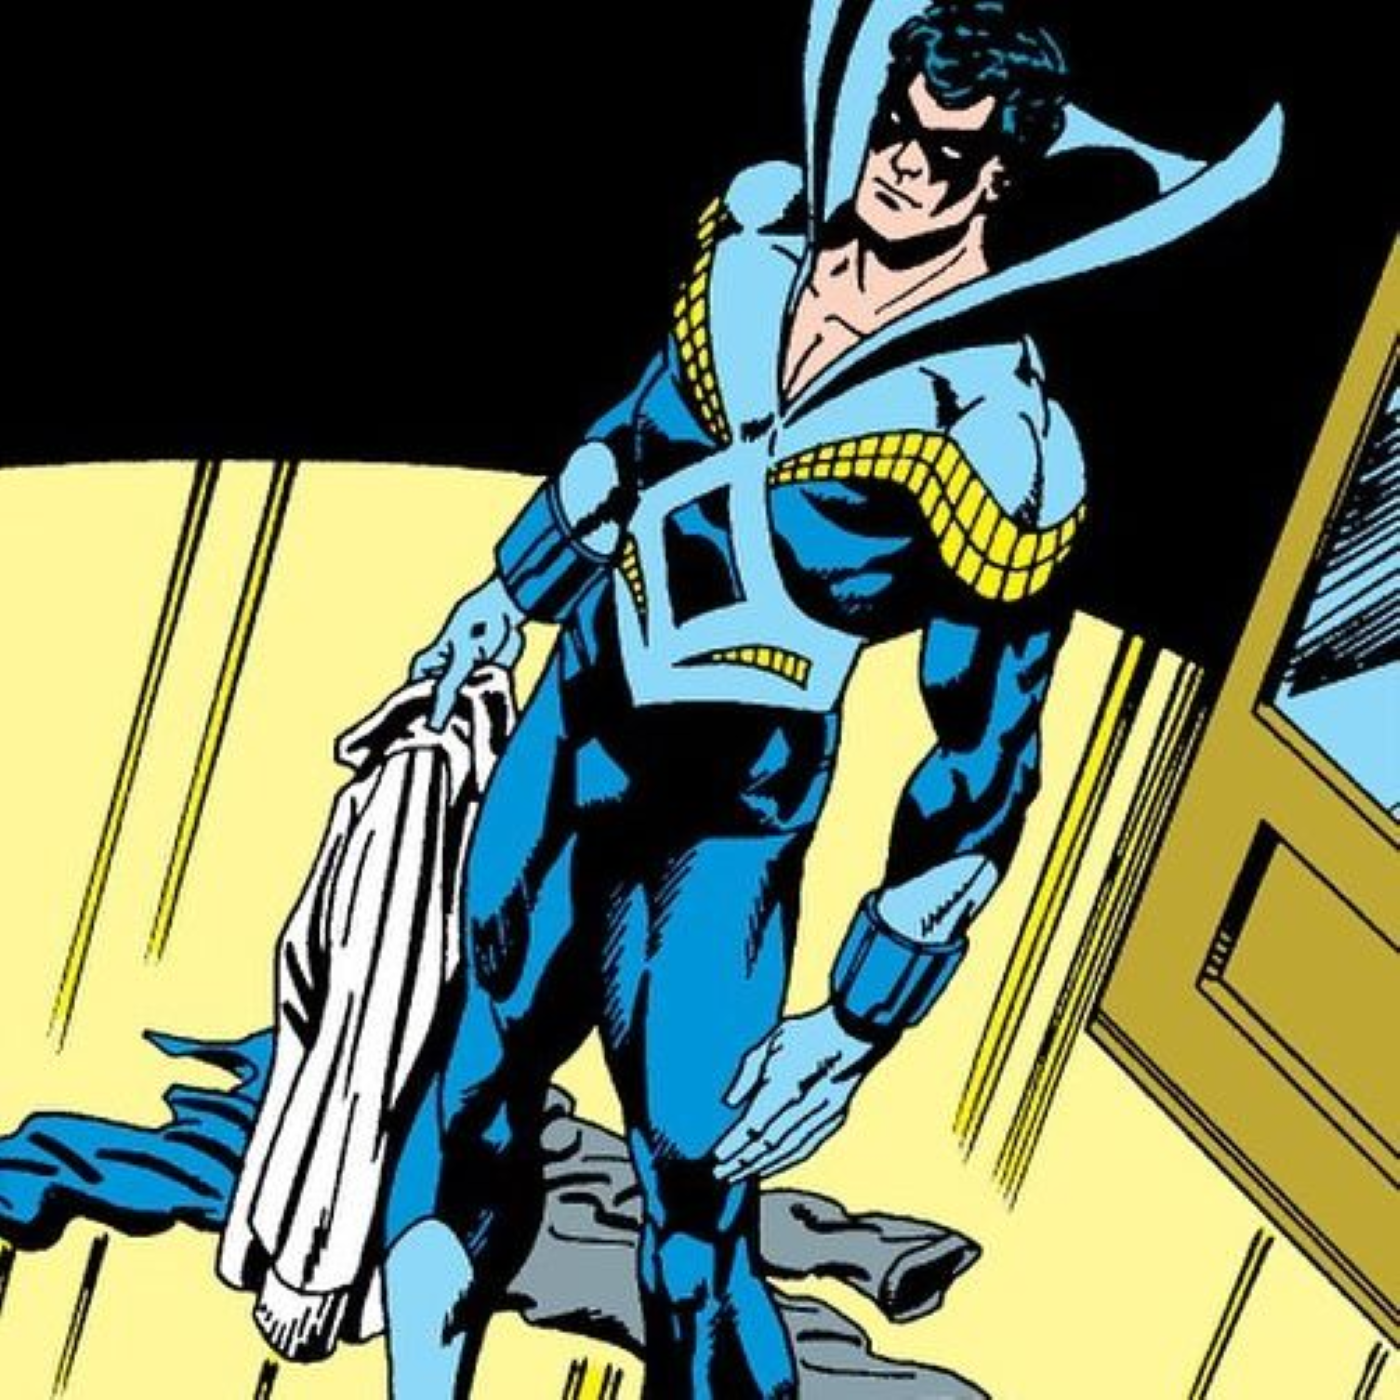 Nightwing in his Discowing suit Dick Grayson